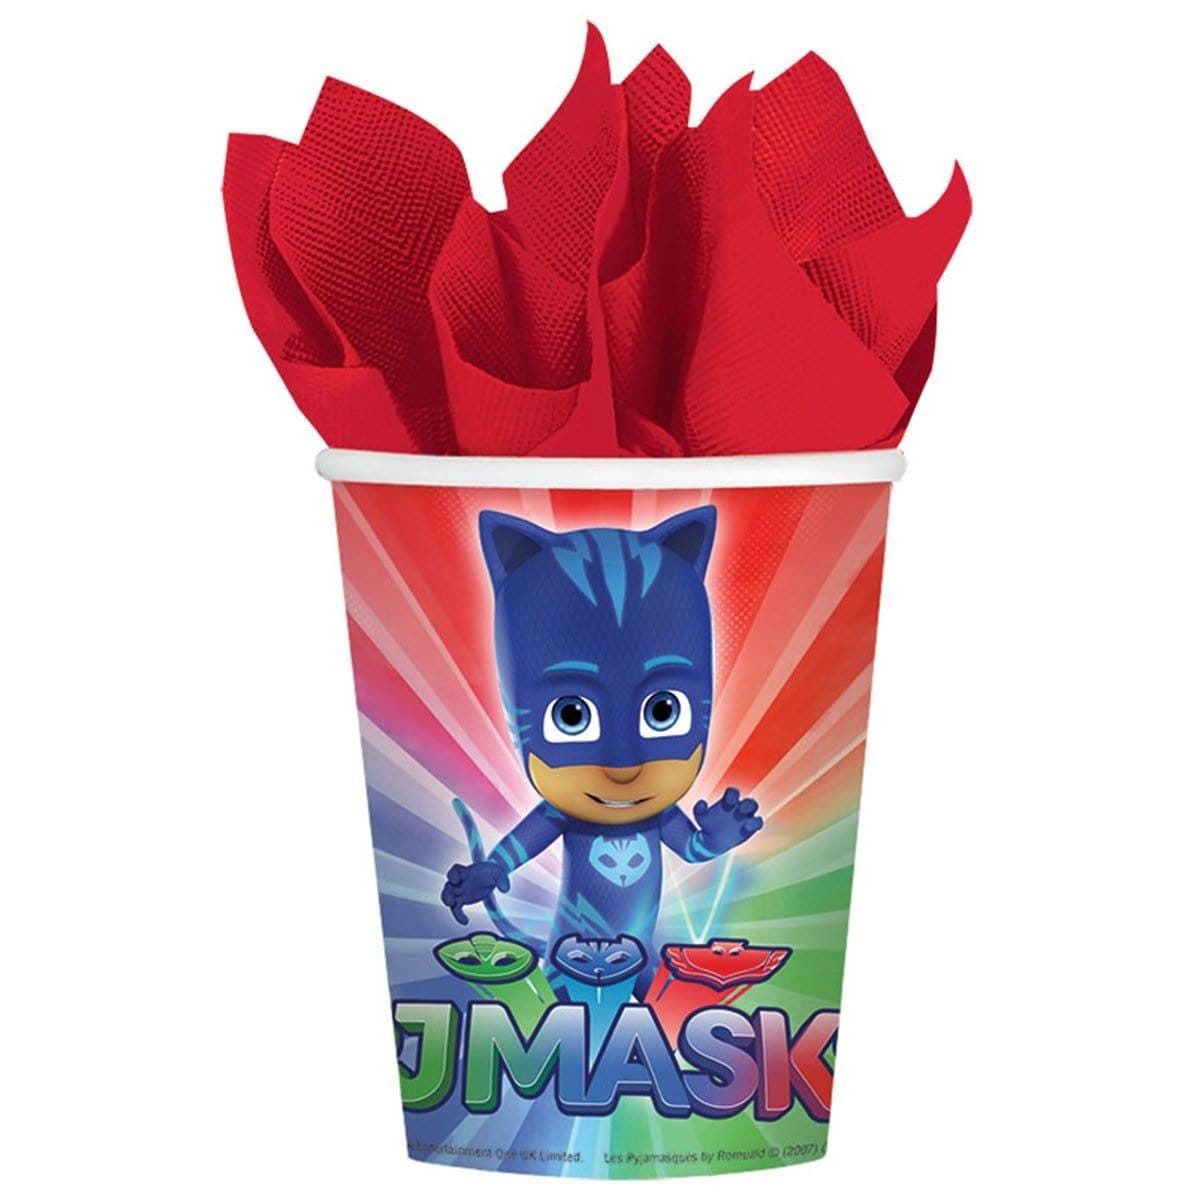 Buy Kids Birthday PJ Masks paper cups 9 ounces, 8 per package sold at Party Expert